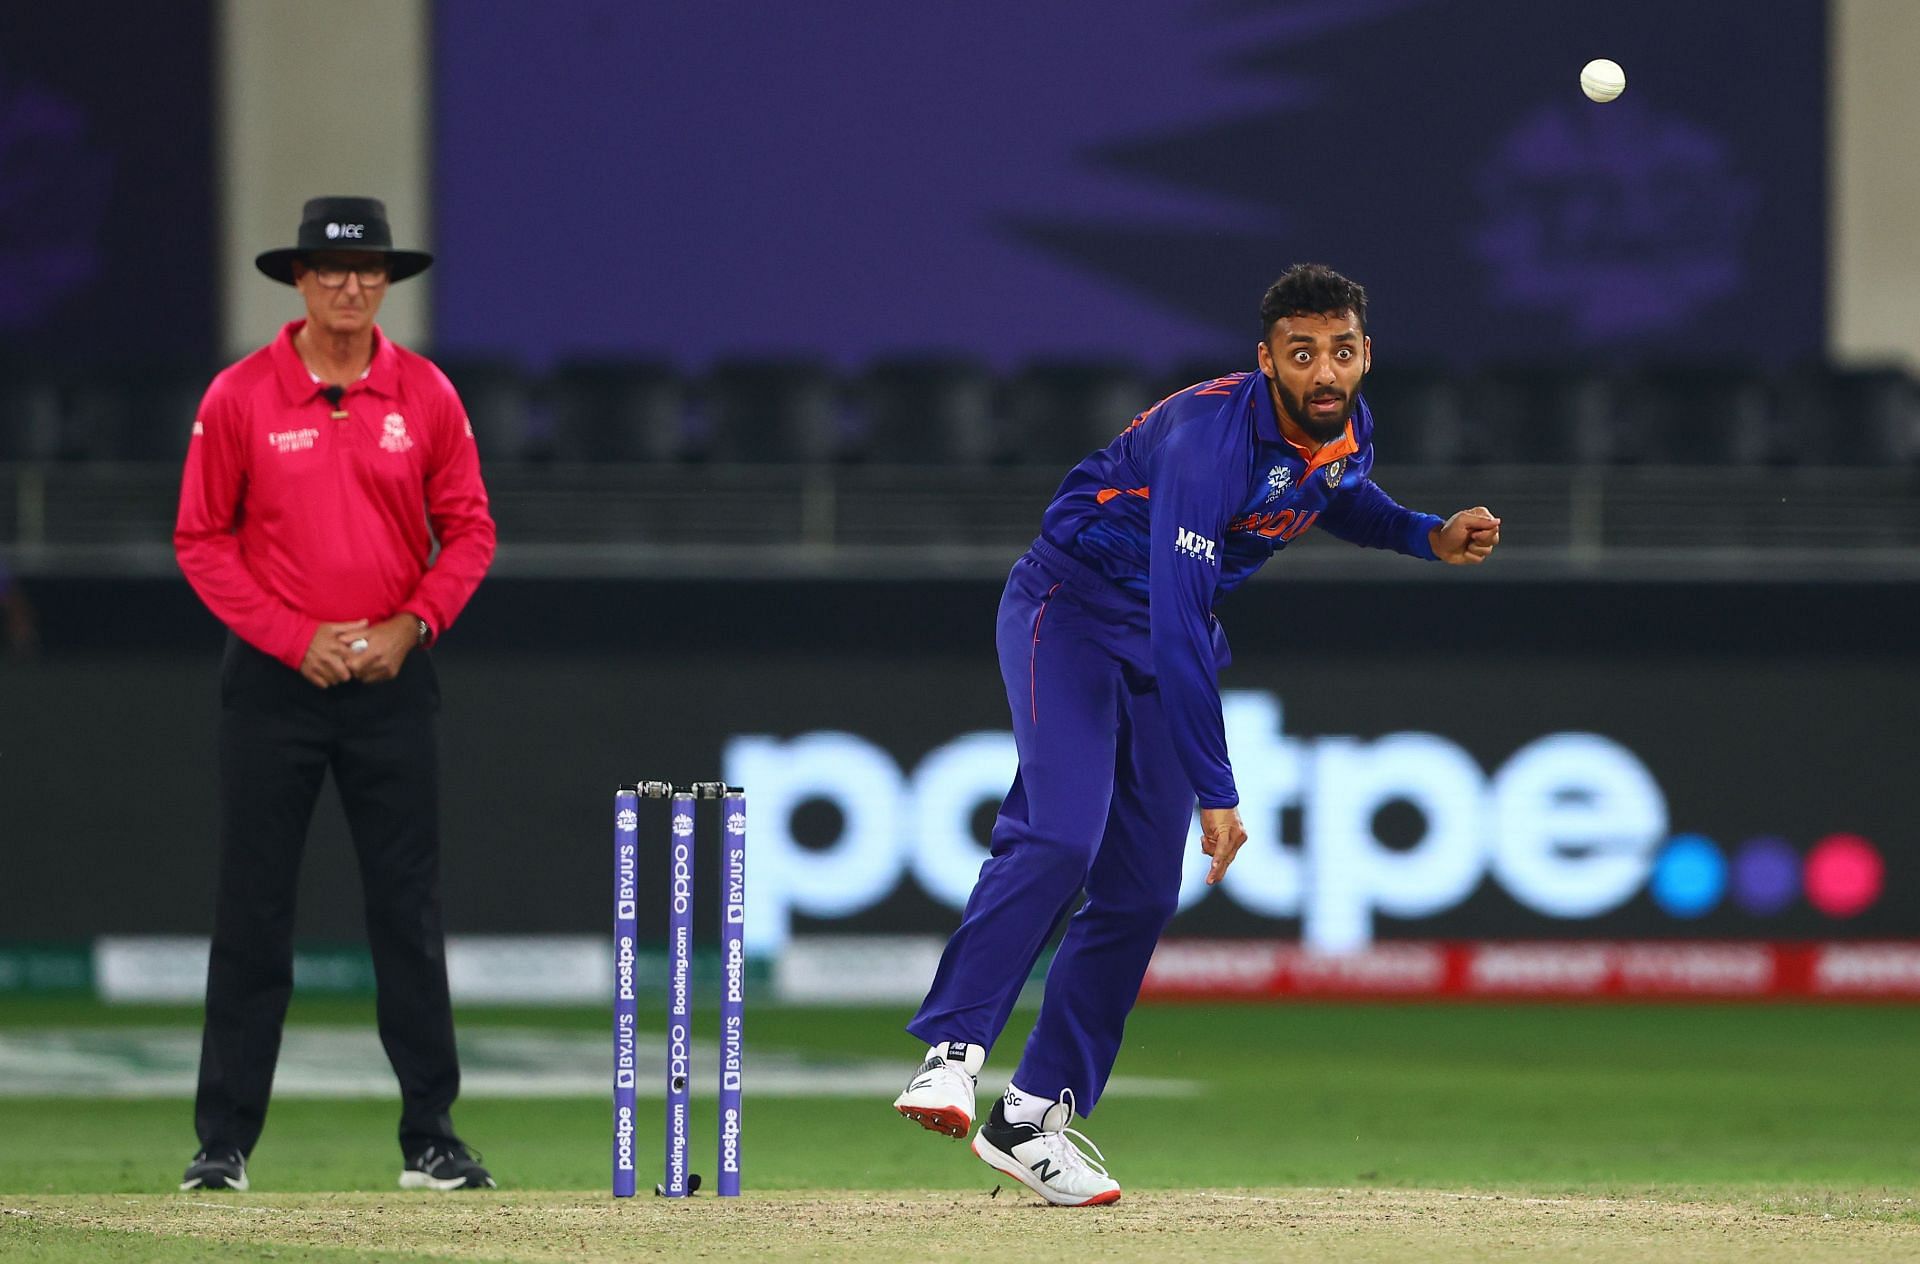 Varun Chakravarthy played for India in the ICC T20 World Cup (Image courtesy: Getty Images)